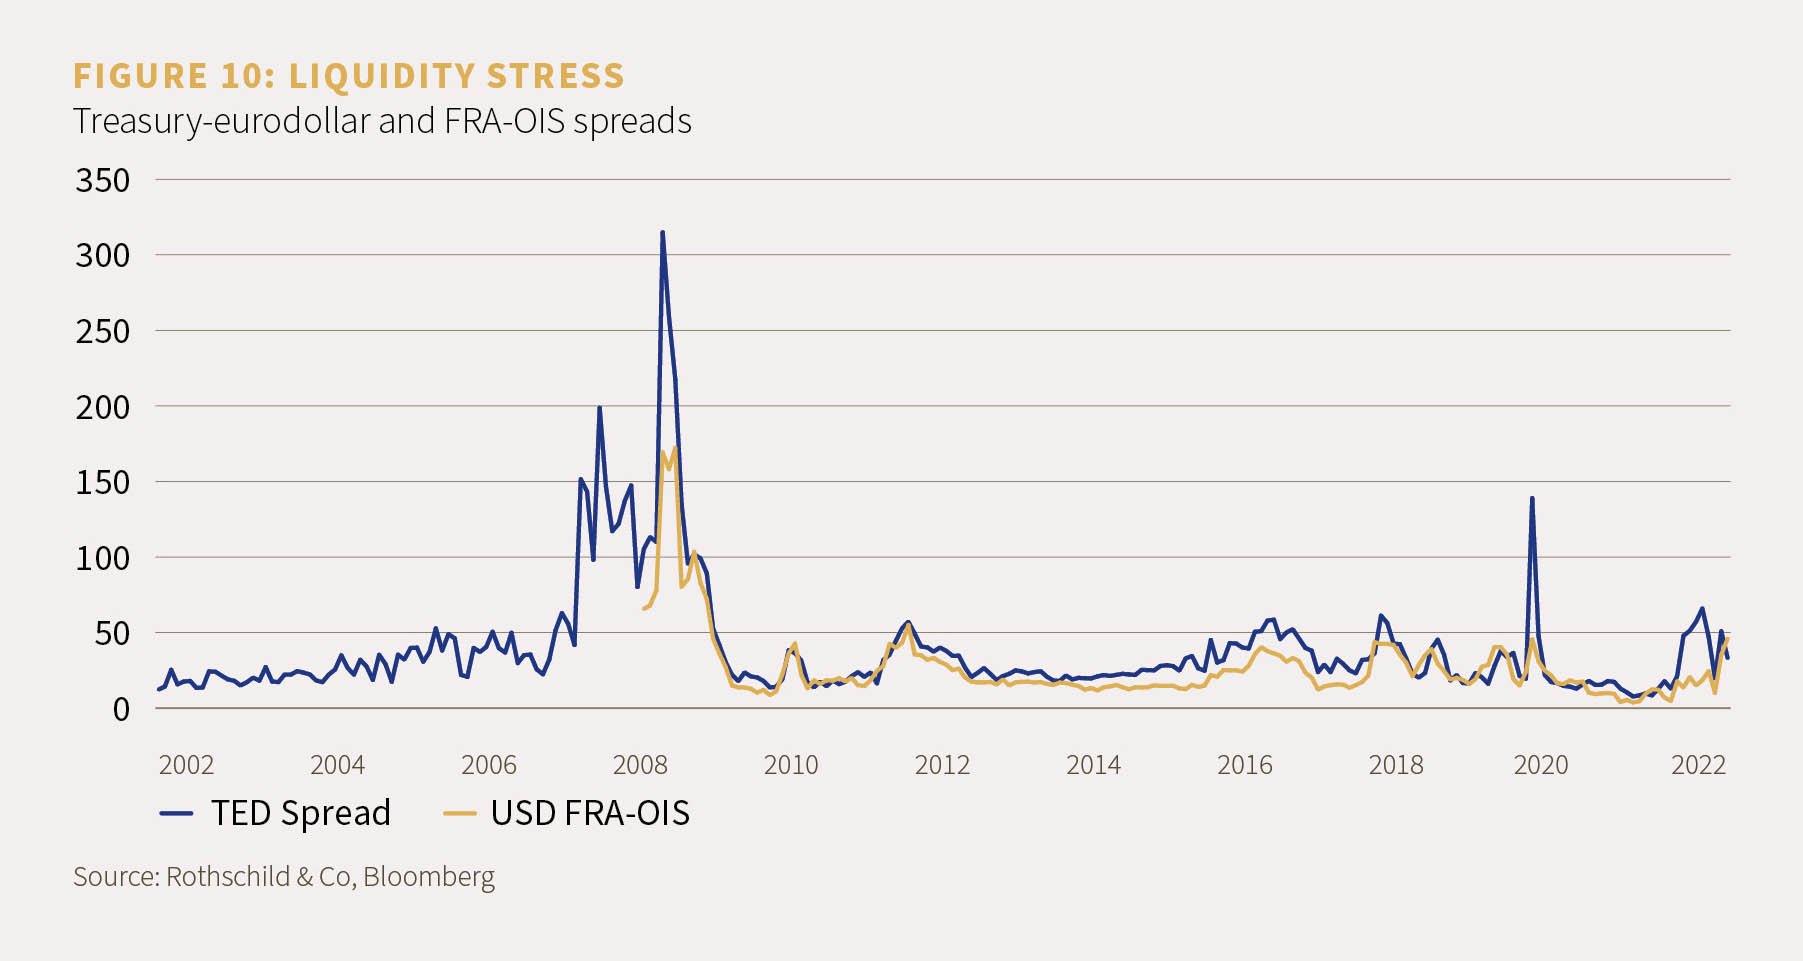 Chart 10 showing the liquidity stress